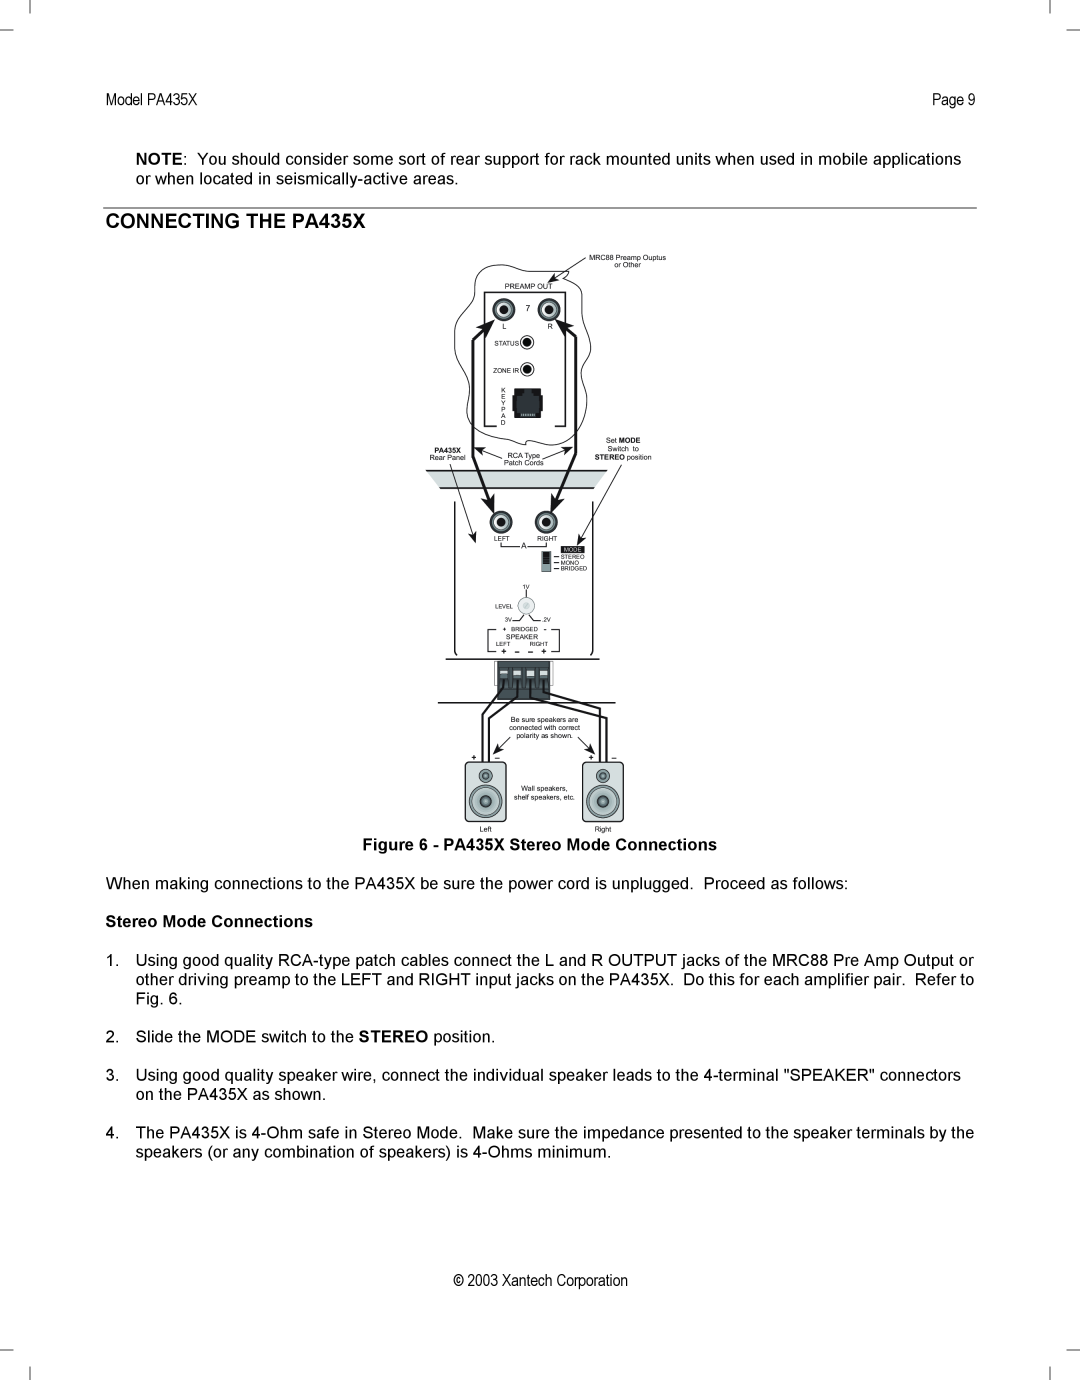 Xantech installation instructions CONNECTING THE PA435X, PA435X Stereo Mode Connections 